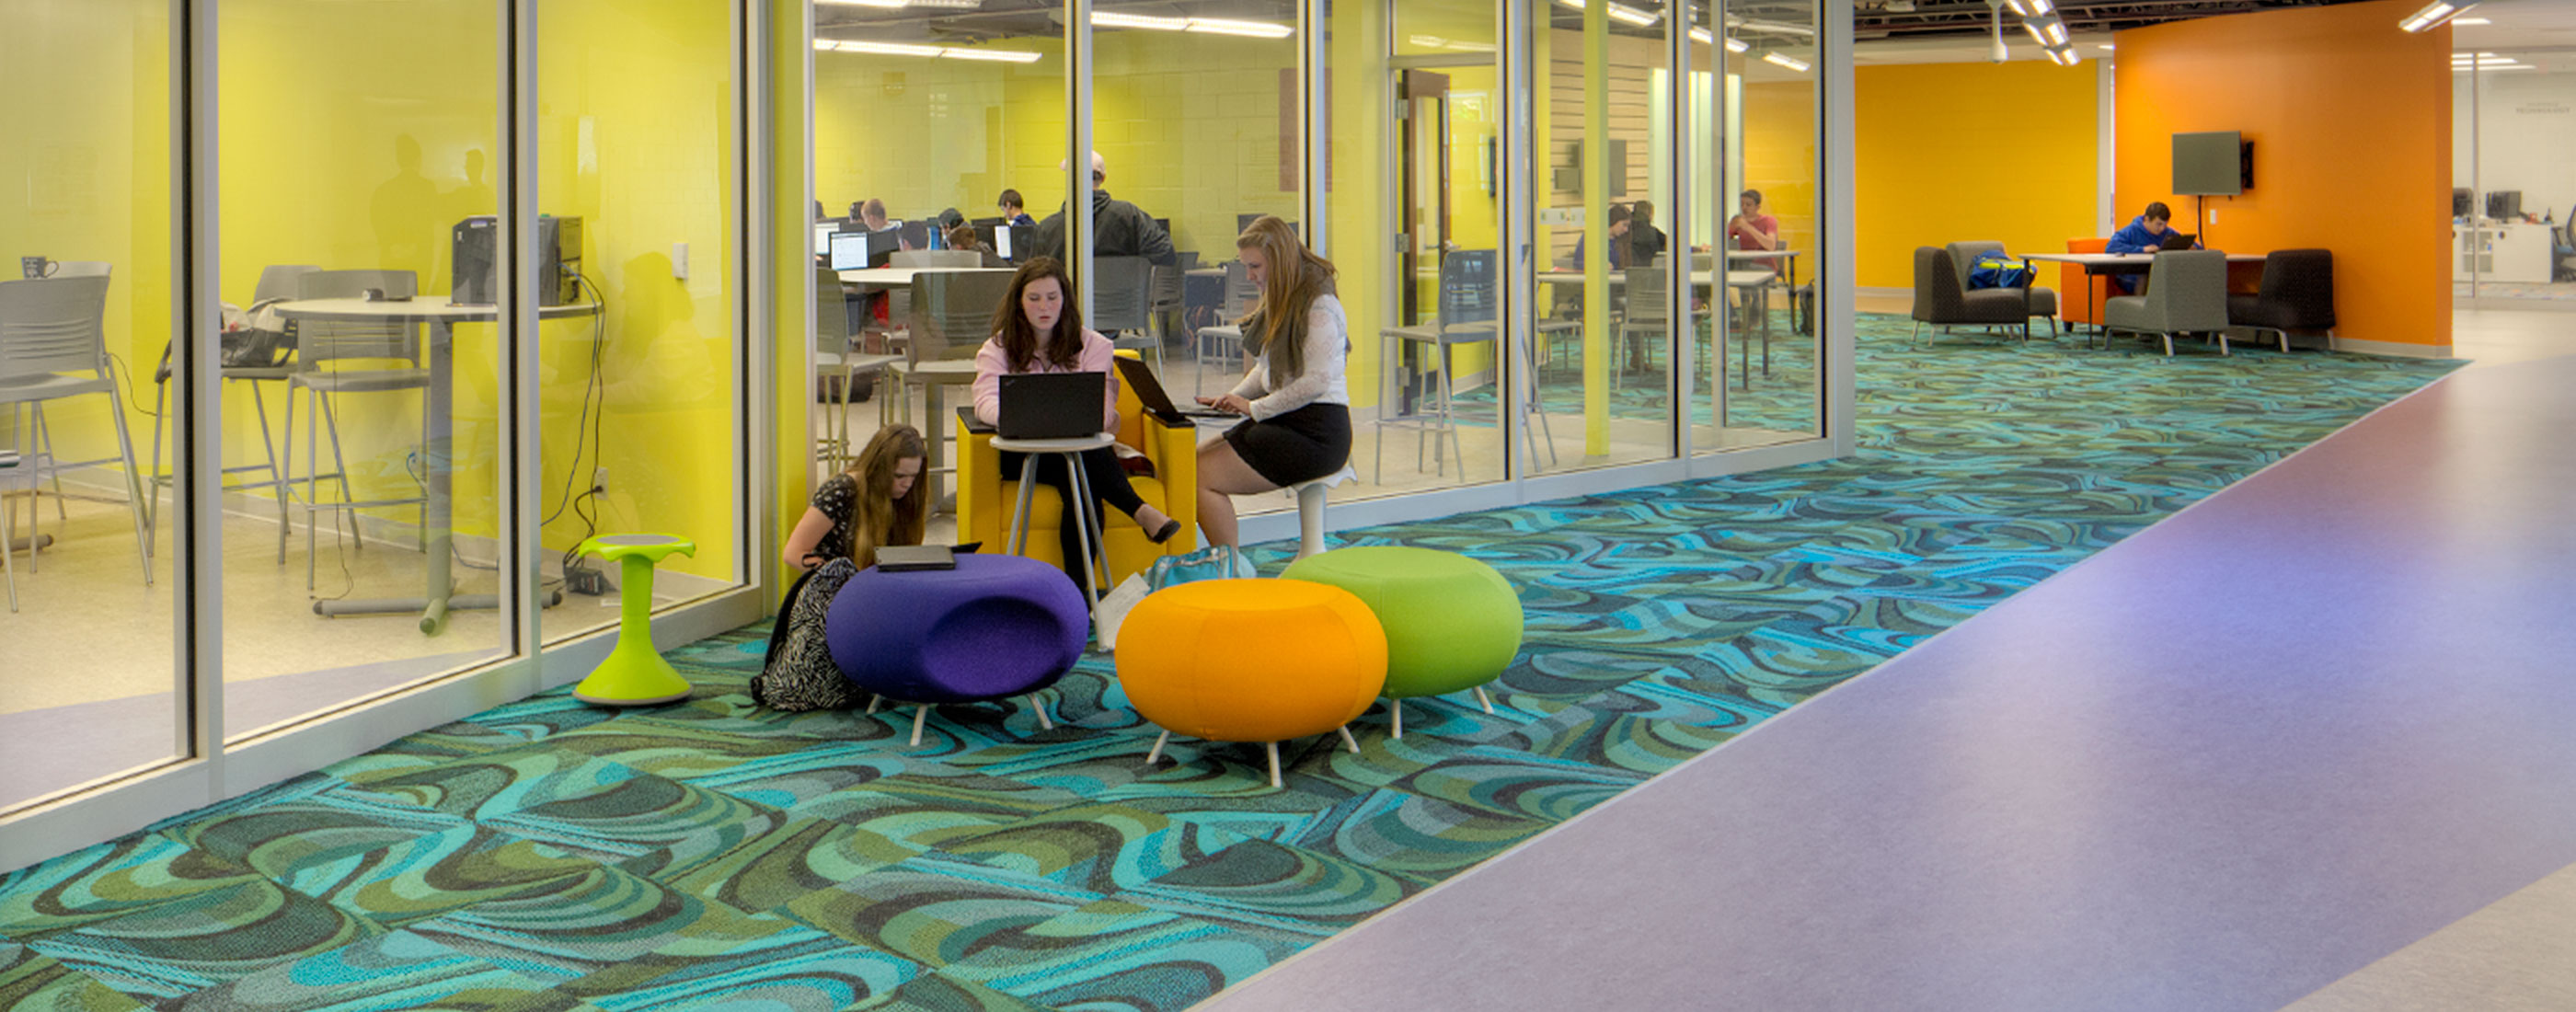 Small classrooms, reconfigurable furniture, and bright colors create a flexible learning environment at Marysville’s STEM High School, designed by OHM Advisors.